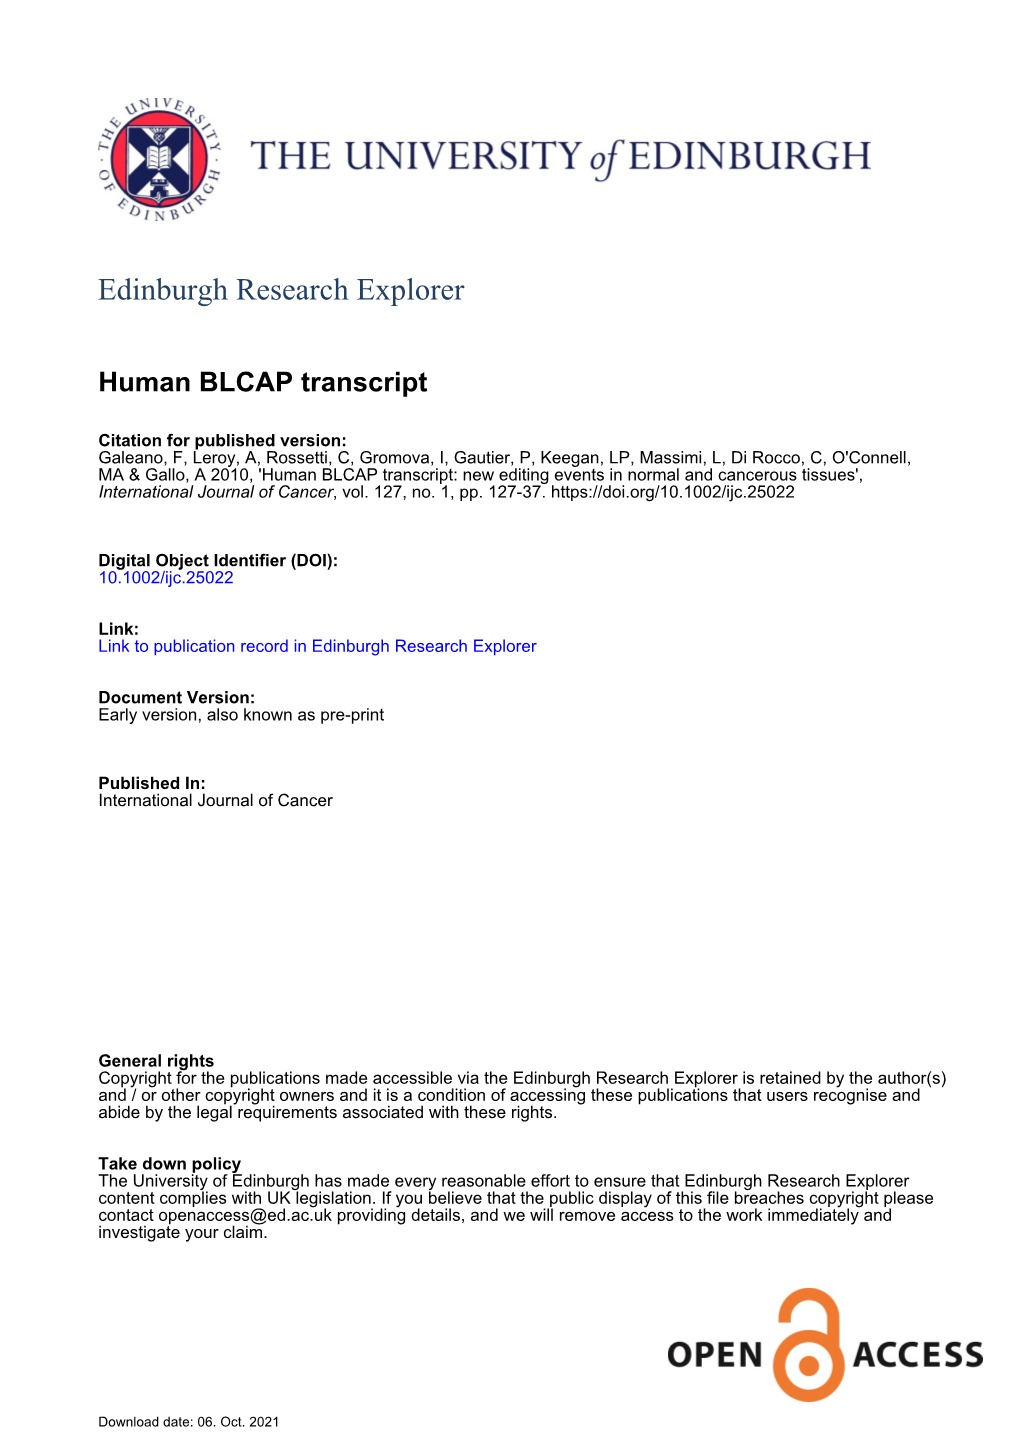 Human BLCAP Transcript: New Editing Events in Normal and Cancerous Tissues', International Journal of Cancer, Vol